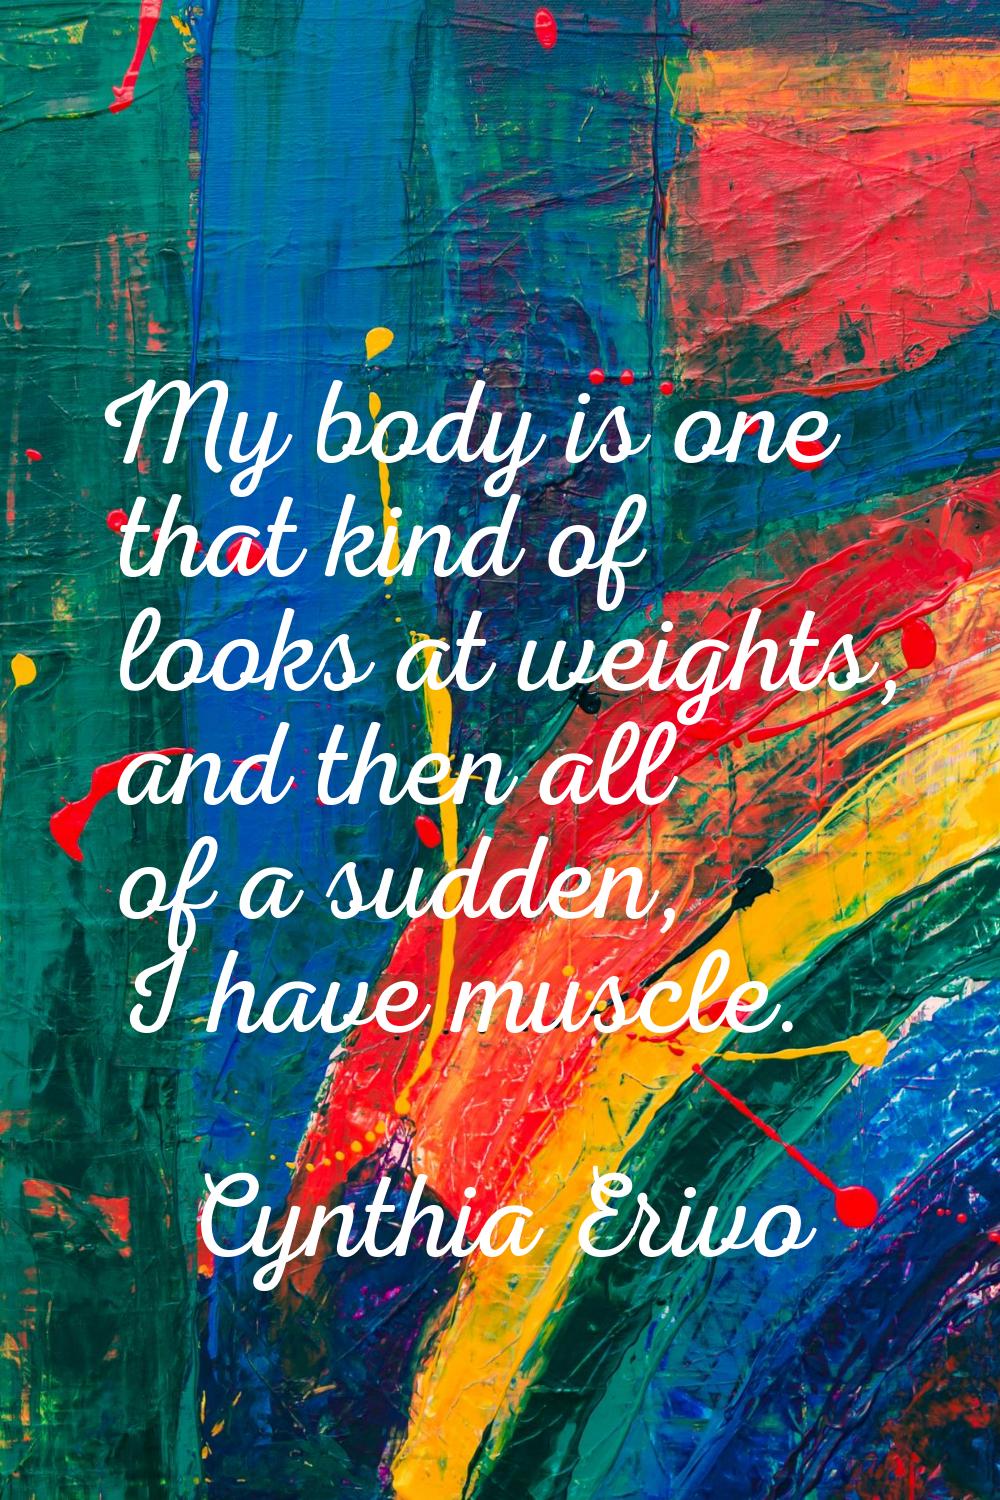 My body is one that kind of looks at weights, and then all of a sudden, I have muscle.